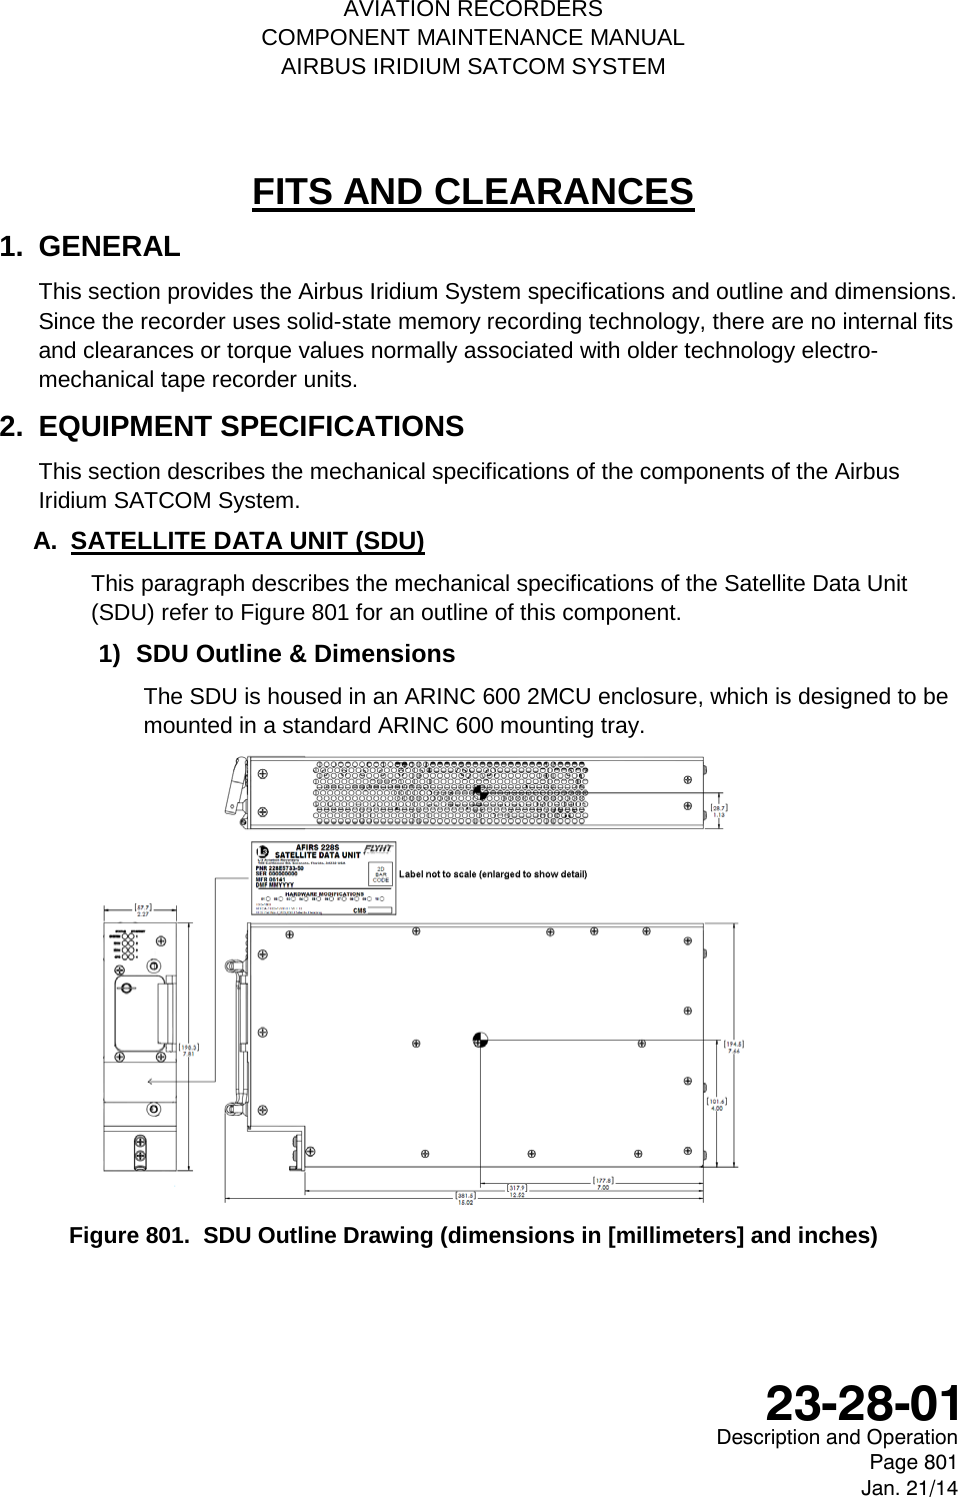    AVIATION RECORDERS COMPONENT MAINTENANCE MANUAL AIRBUS IRIDIUM SATCOM SYSTEM FITS AND CLEARANCES 1.  GENERAL This section provides the Airbus Iridium System specifications and outline and dimensions. Since the recorder uses solid-state memory recording technology, there are no internal fits and clearances or torque values normally associated with older technology electro-mechanical tape recorder units. 2.  EQUIPMENT SPECIFICATIONS This section describes the mechanical specifications of the components of the Airbus Iridium SATCOM System. A. SATELLITE DATA UNIT (SDU) This paragraph describes the mechanical specifications of the Satellite Data Unit (SDU) refer to Figure 801 for an outline of this component. 1) SDU Outline &amp; Dimensions The SDU is housed in an ARINC 600 2MCU enclosure, which is designed to be mounted in a standard ARINC 600 mounting tray.   Figure 801.  SDU Outline Drawing (dimensions in [millimeters] and inches)  Description and Operation Page 801 Jan. 21/14  23-28-01 